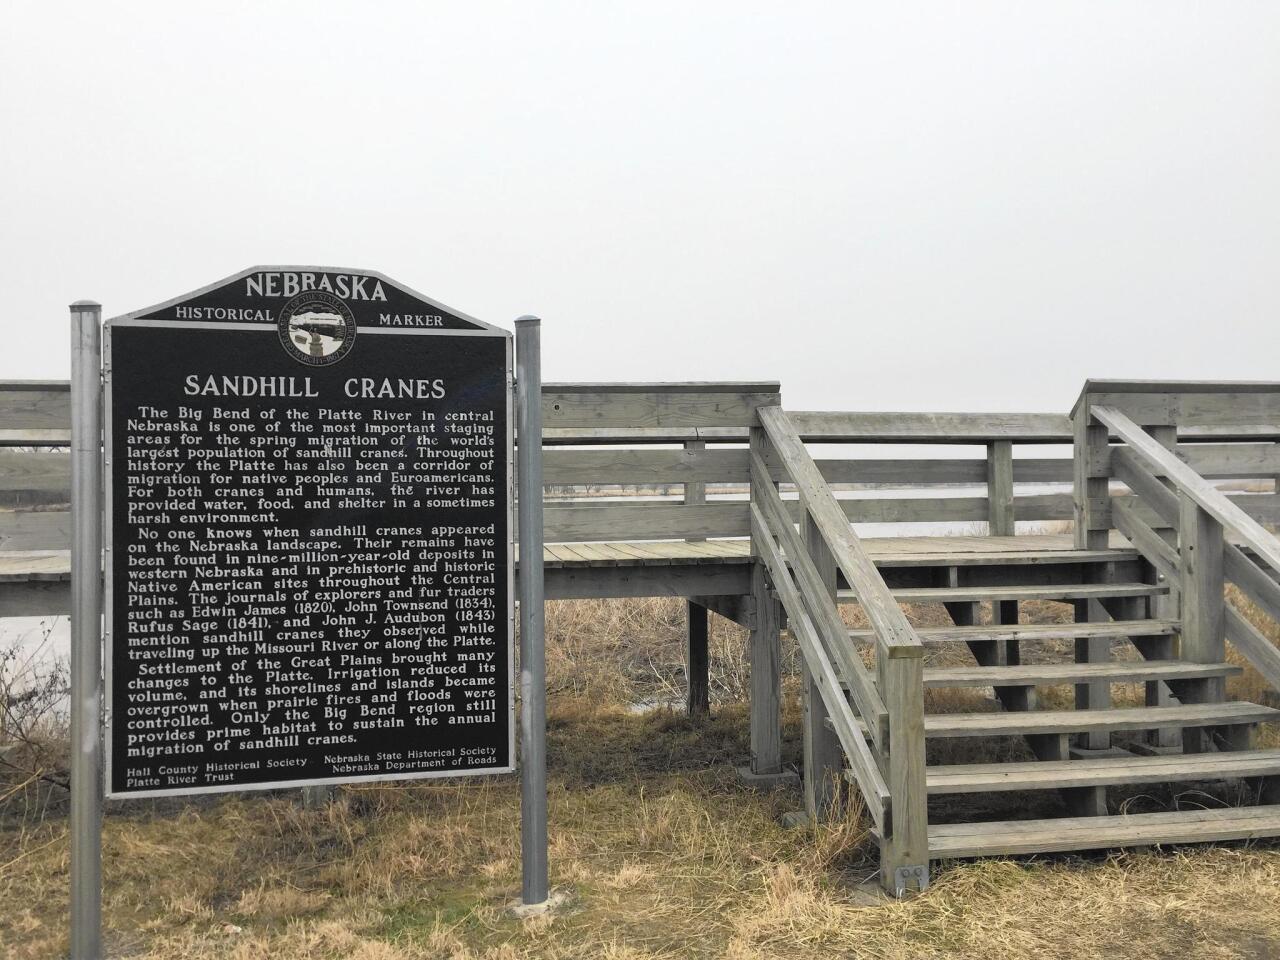 A historical marker at a viewing platform in central Nebraska tells the story of the sandhill crane migration, which brings hundreds of thousands of birds to the region each year between late February and early April.